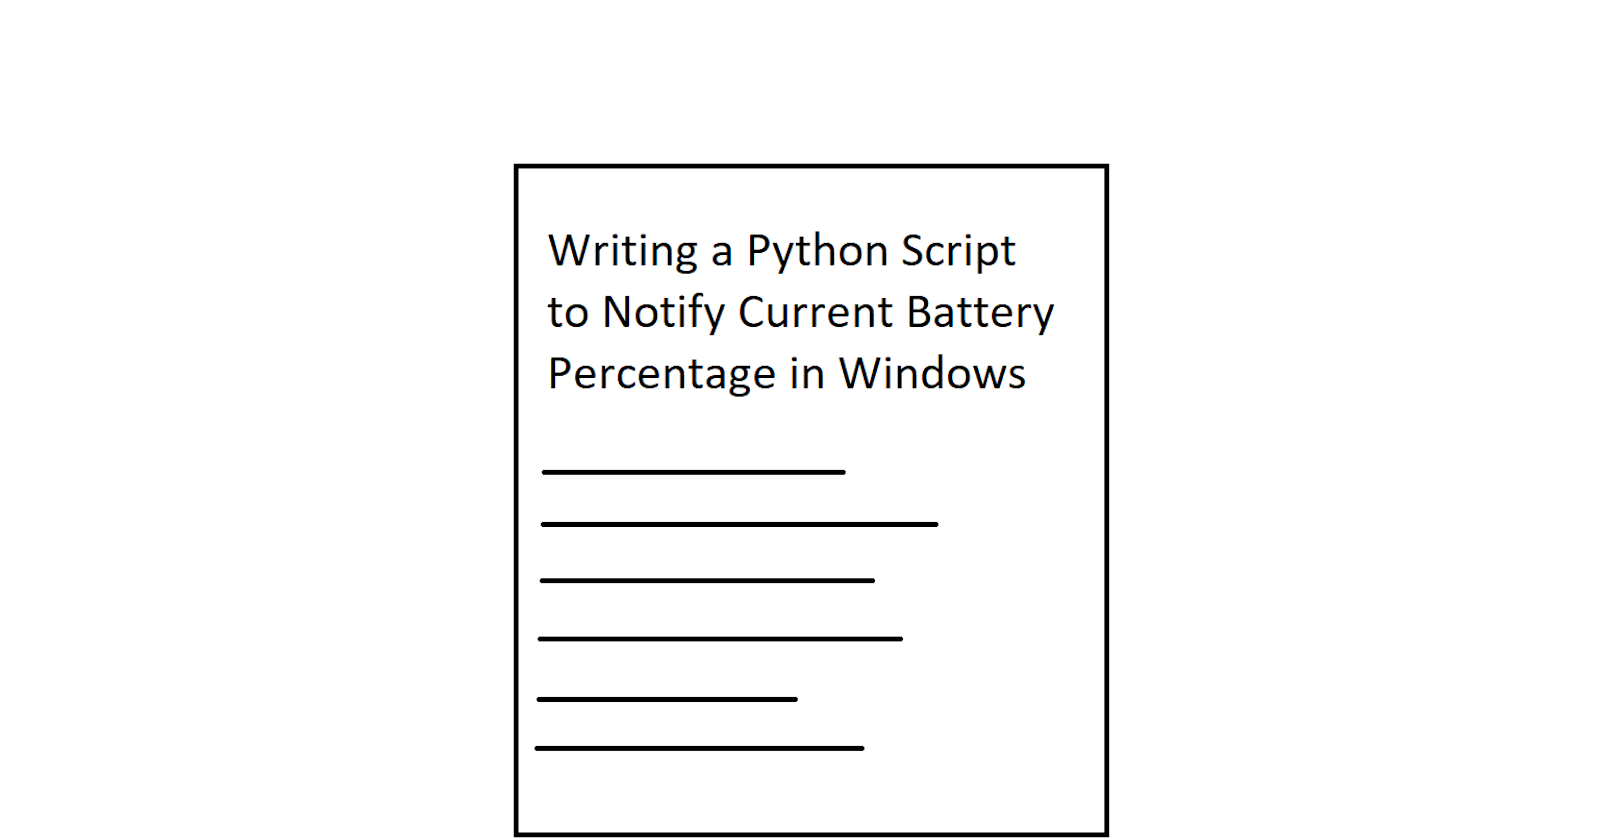 Write a Python Script to Notify the Current Battery Percentage in Windows